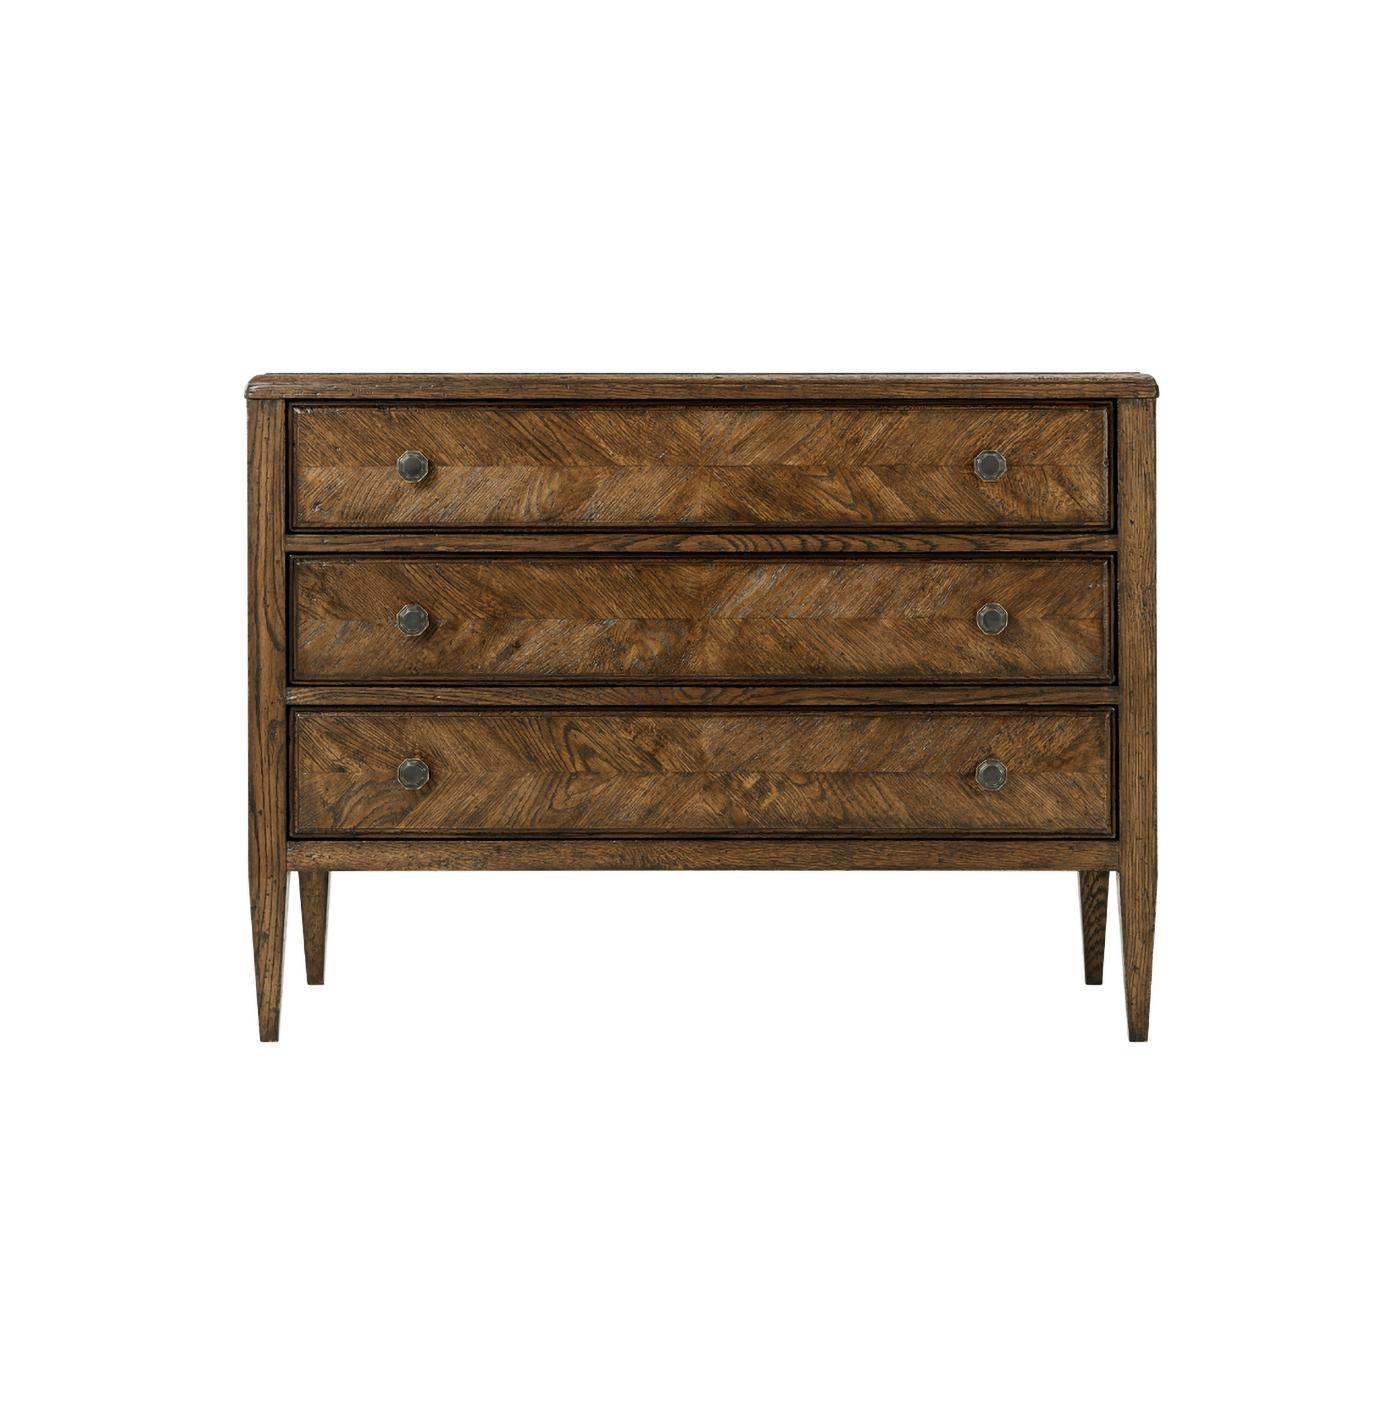 A dark oak parquetry chest of drawers in Dusk finish. It has mirrored herringbone oak parquetry drawers, classically tapered legs, and six Verde Bronze finish handles. 
Shown in Dusk finish.
Dimensions: 38